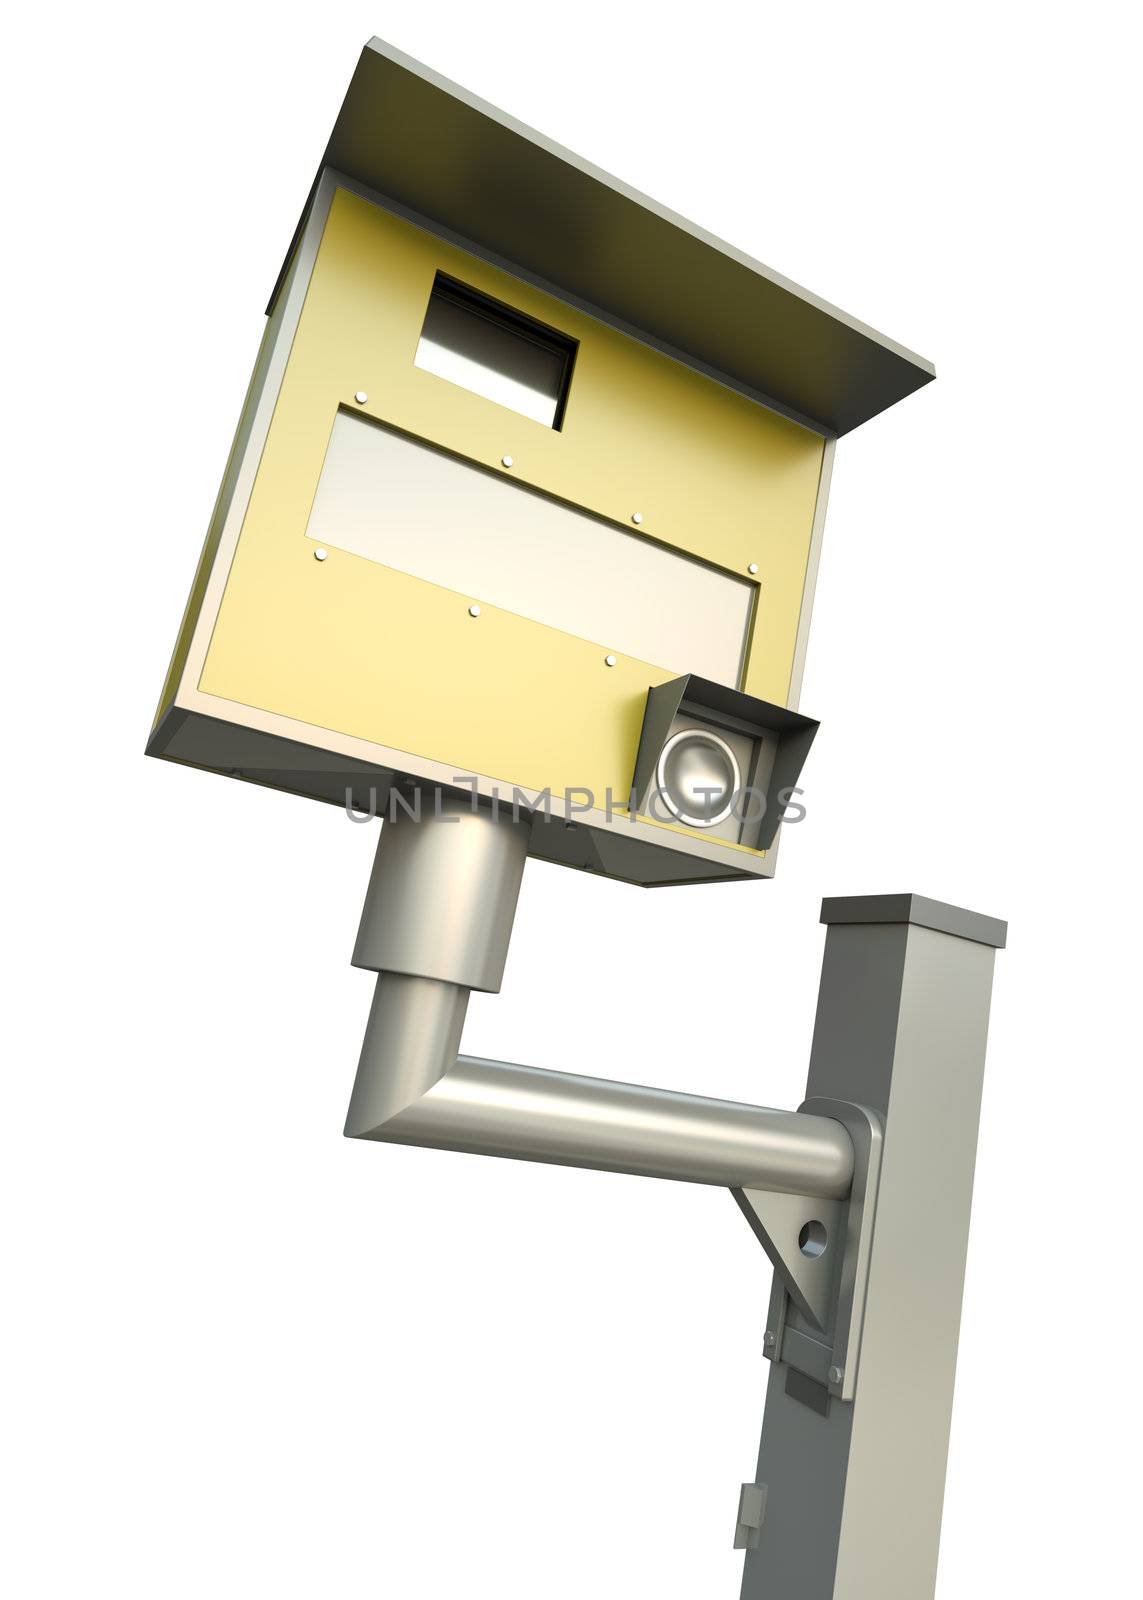 Yellow speed camera over white background. 3D render.